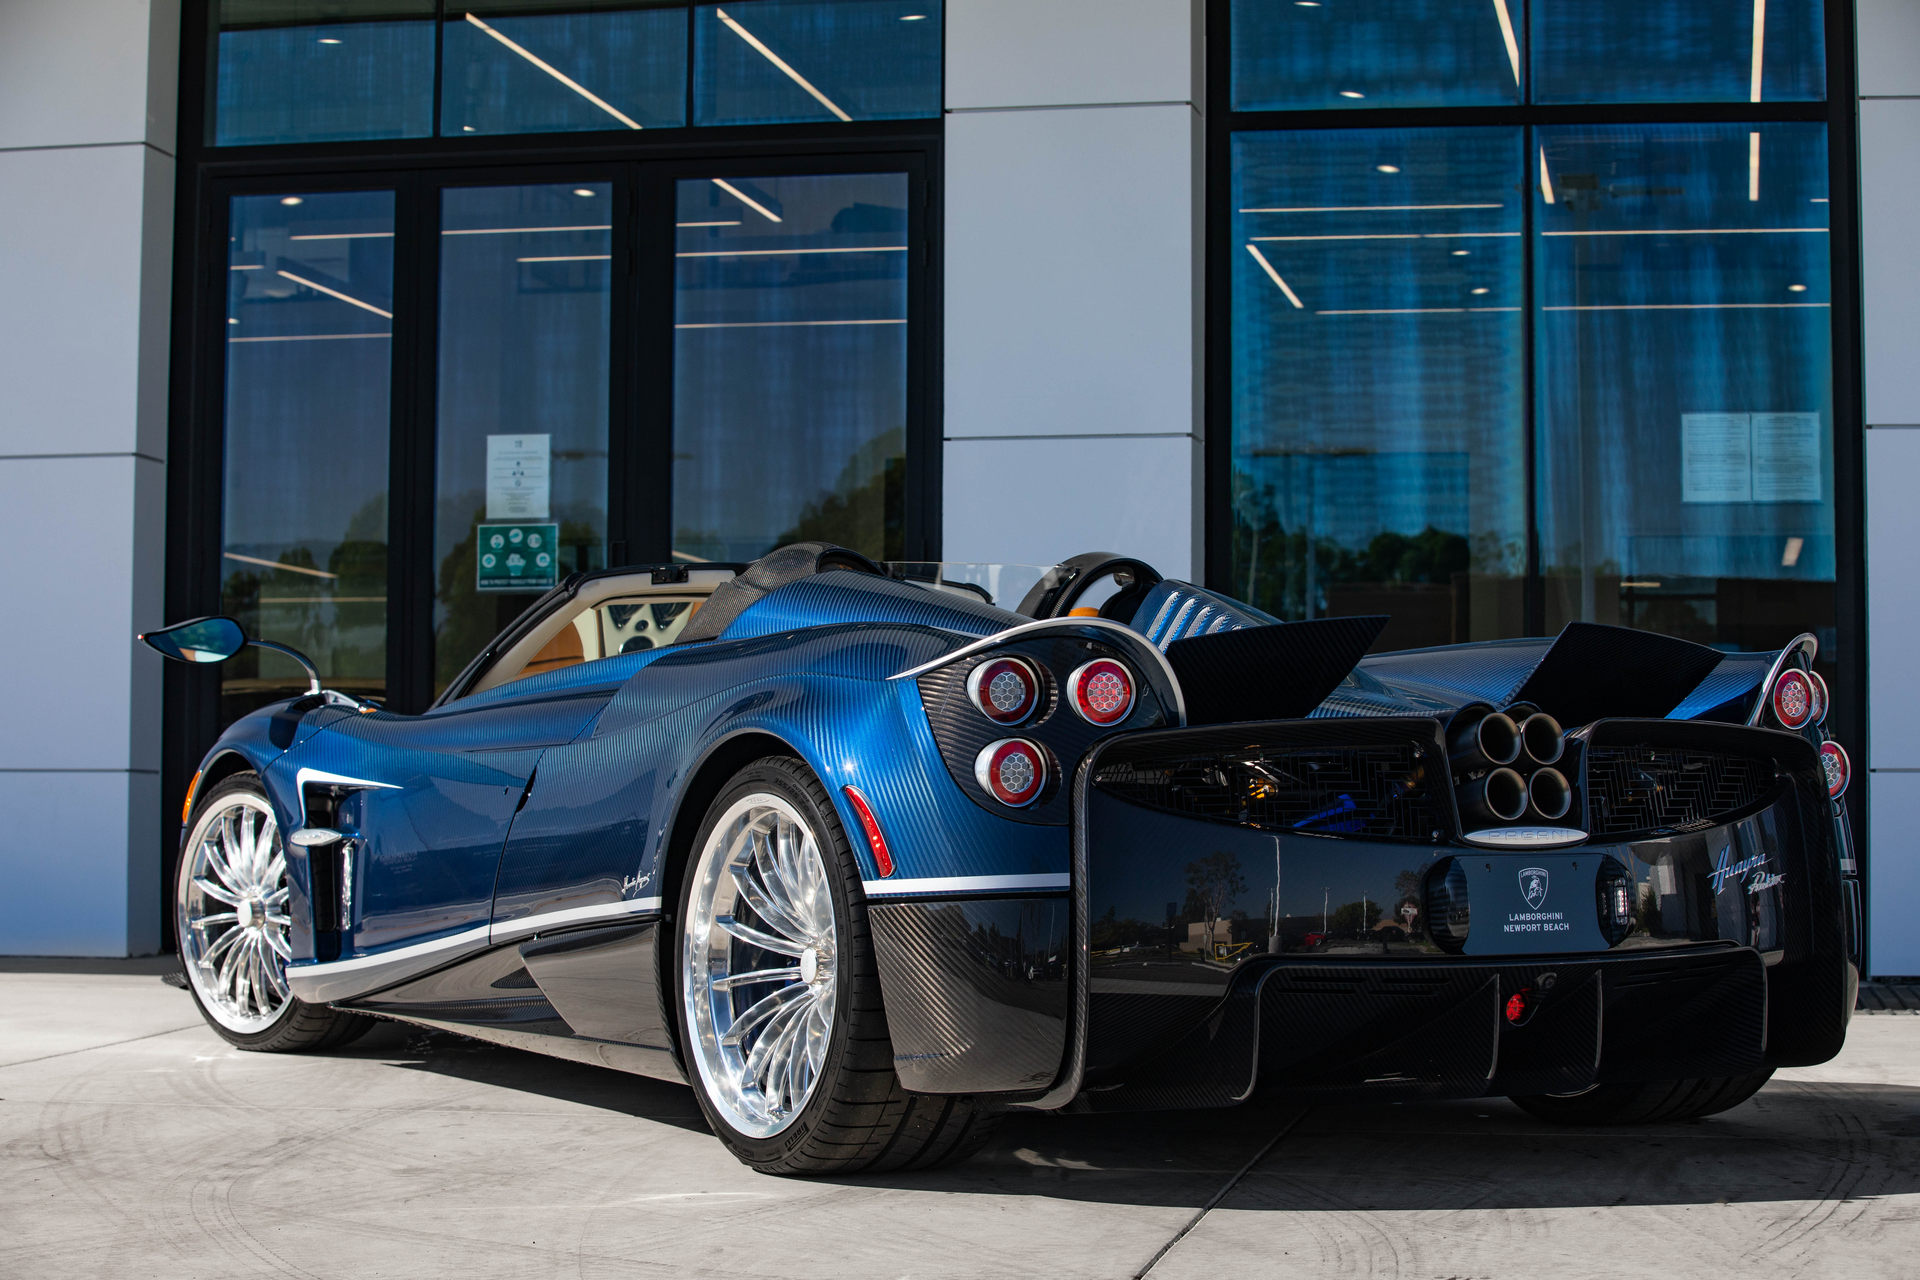 https://www.carscoops.com/wp-content/uploads/2021/01/Pagani-Huayra-Roadster-14.jpg